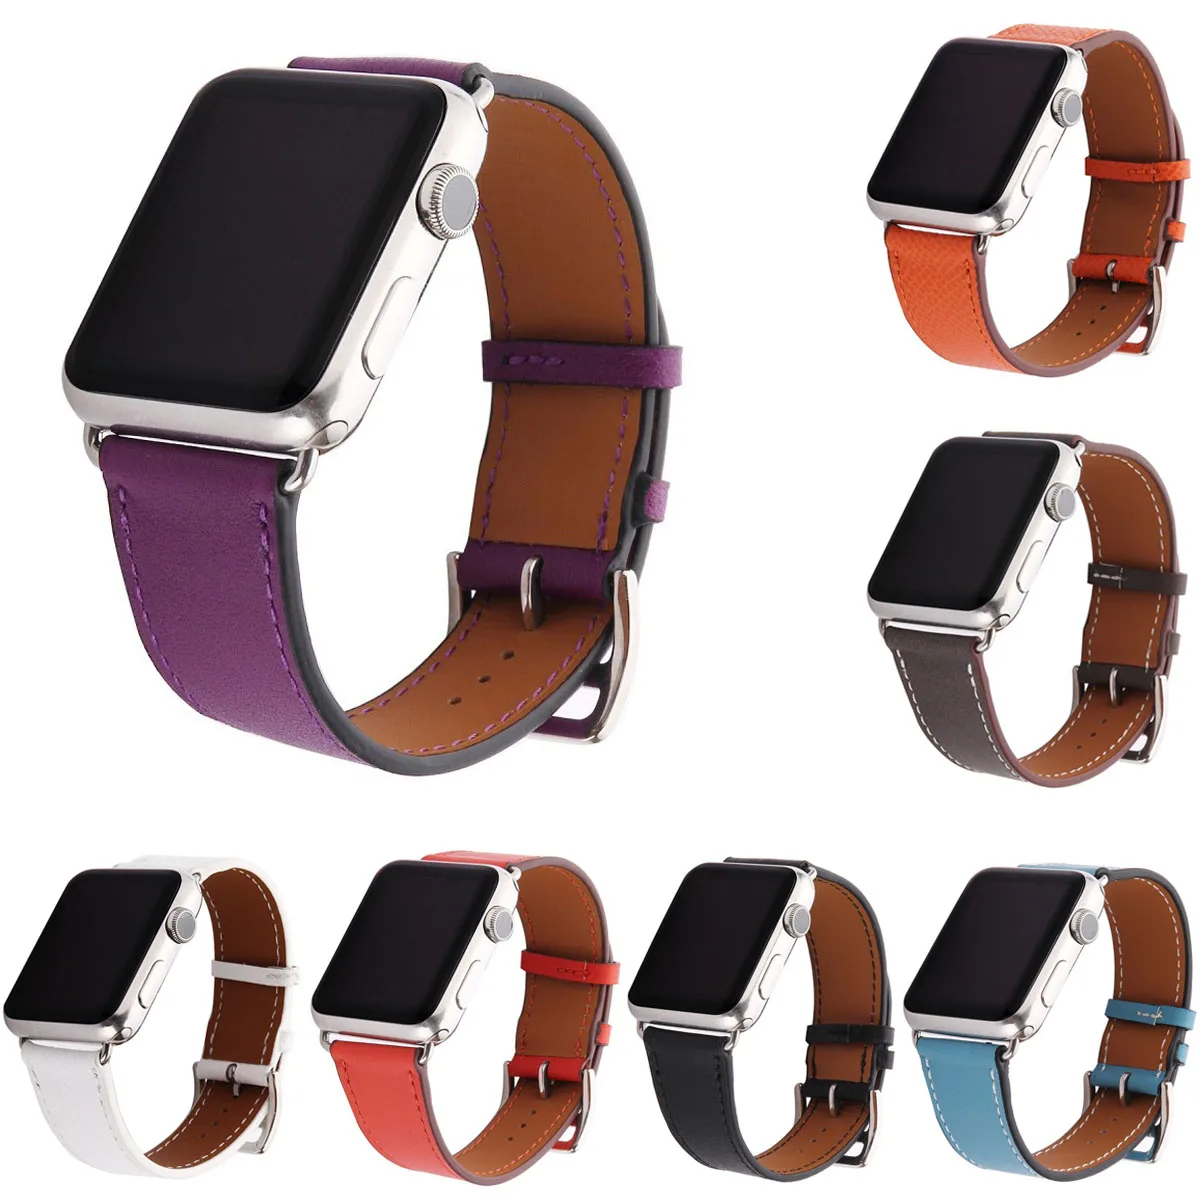 

DAHASE Litchi Genuine Leather Band for Apple Watch Series 4 3 2 1 Strap for iWatch Classic Watchband 40mm 44mm 42mm 38mm